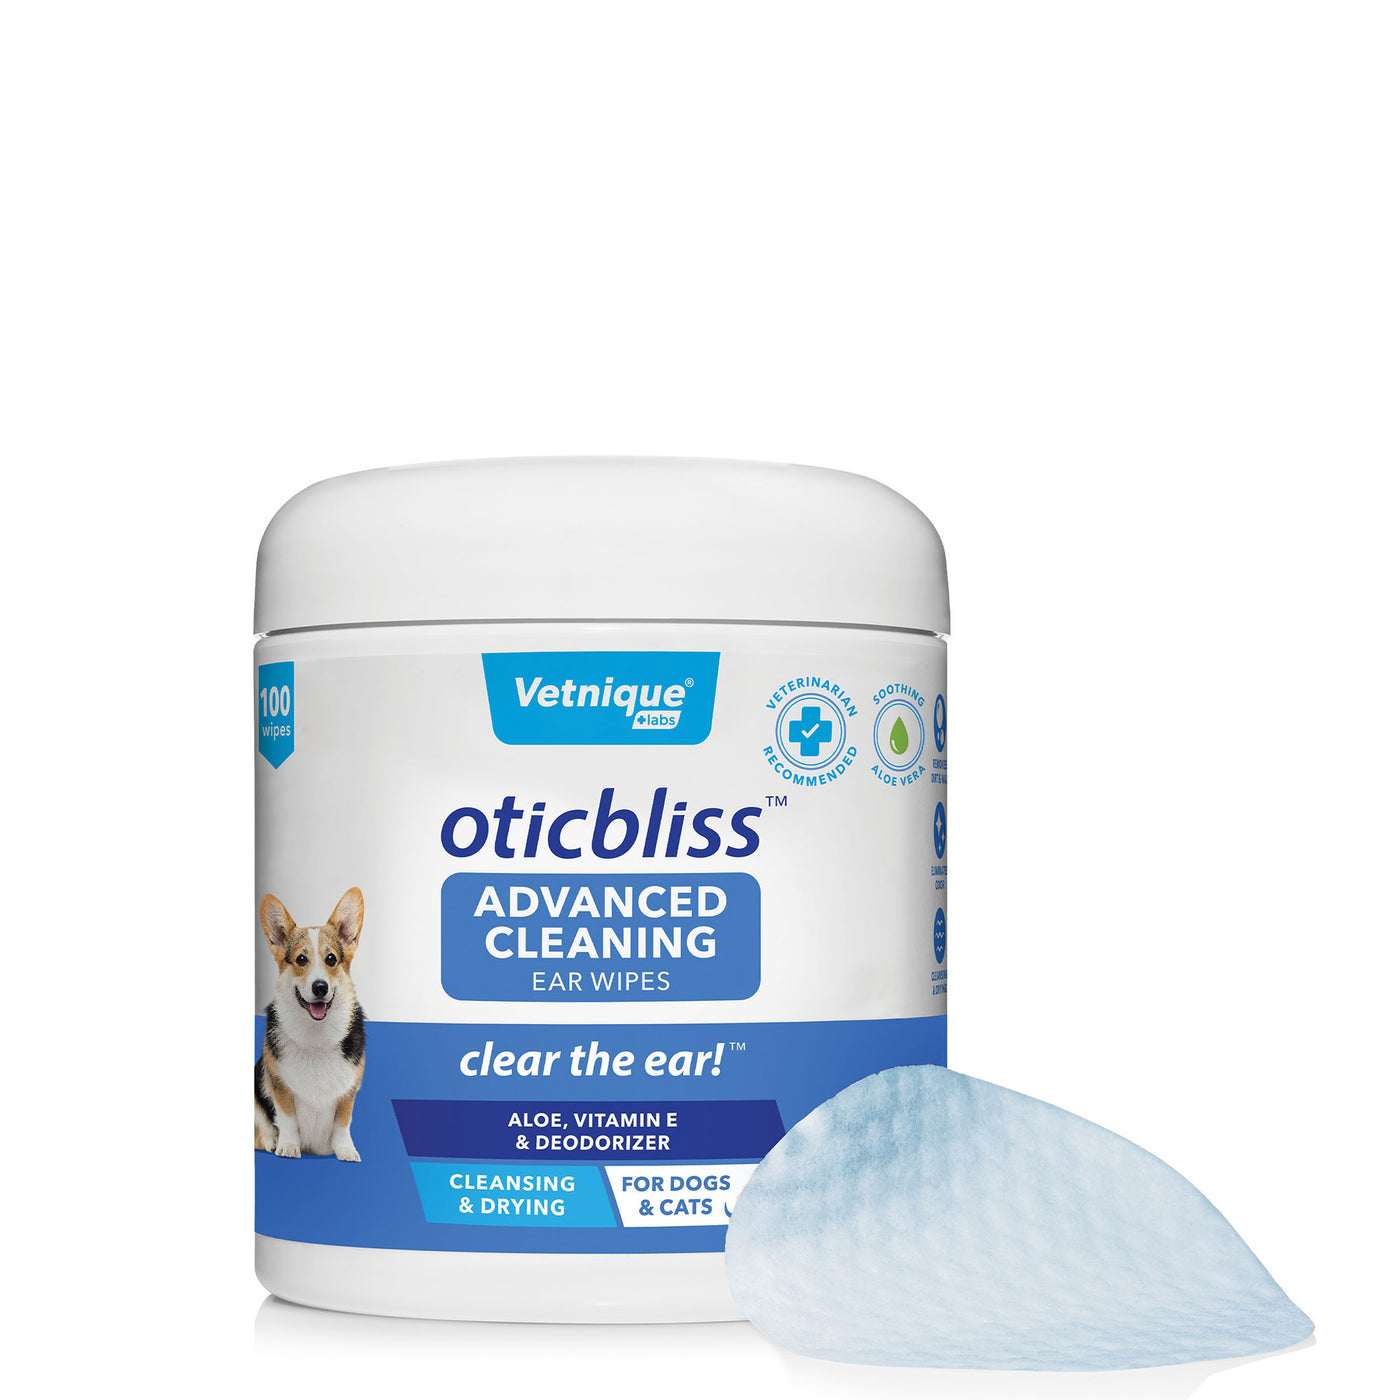 Oticbliss™ Ear Care Bundle Oticbliss Advanced Cleaning Ear Wipes